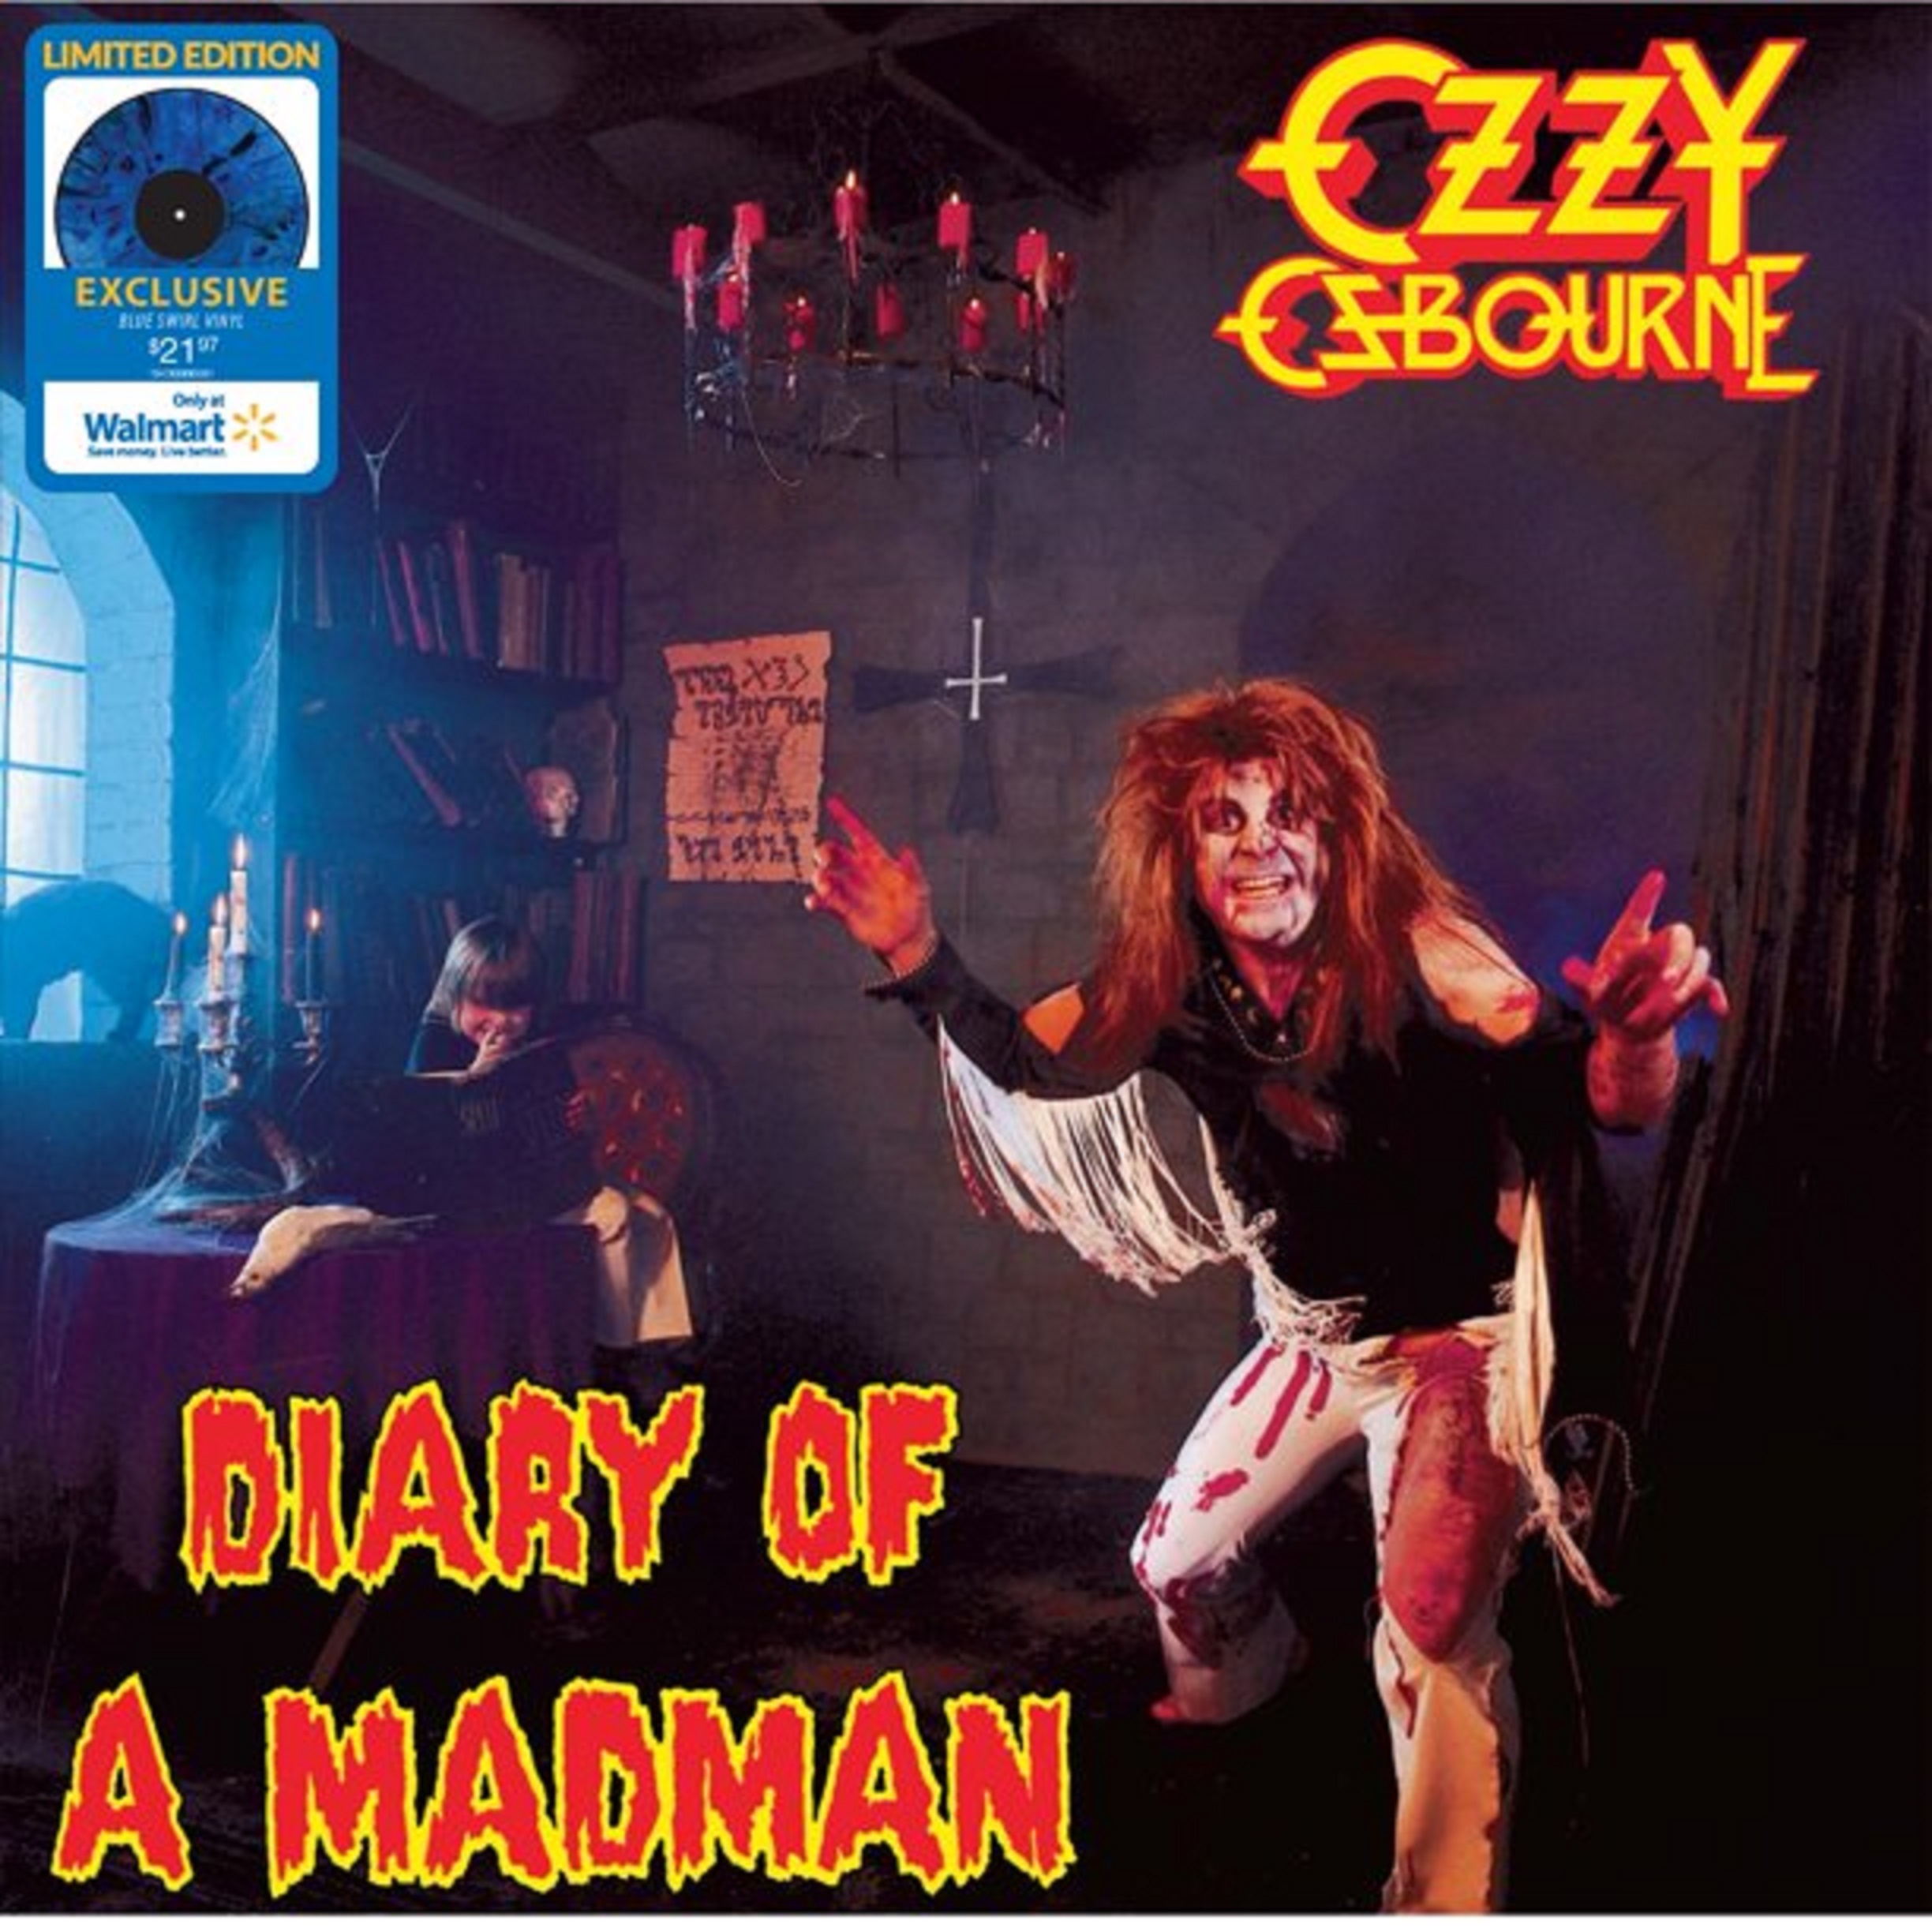 OZZY OSBOURNE’s ‘Diary Of A Madman’ 40th Anniversary Expanded Digital Edition Out Today; New Video For “Flying High Again”